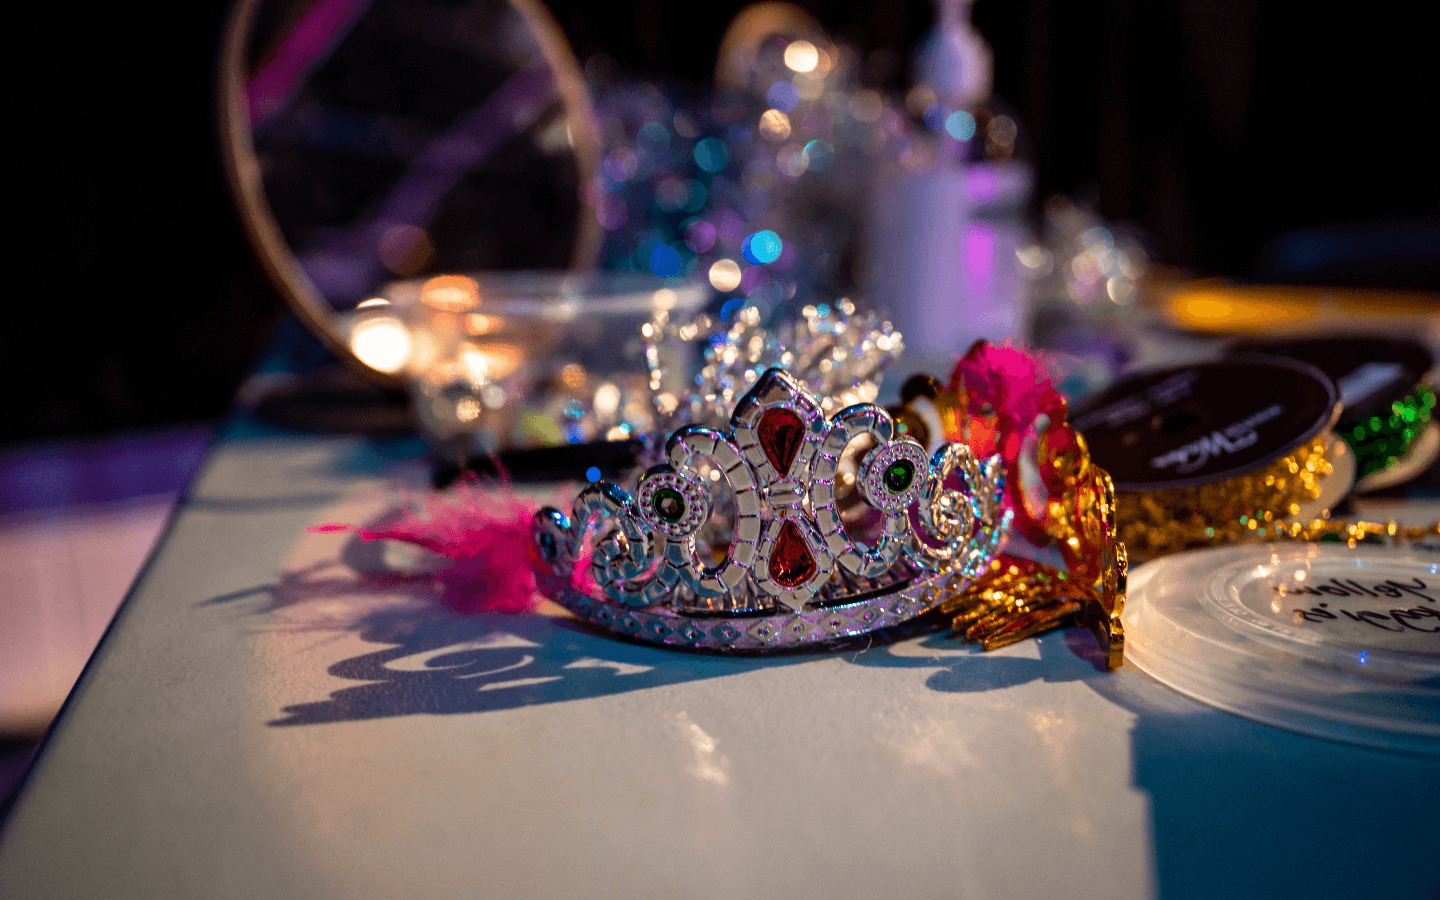 A crown on a table surrounded by feather boas, and other colourful dress-up items.